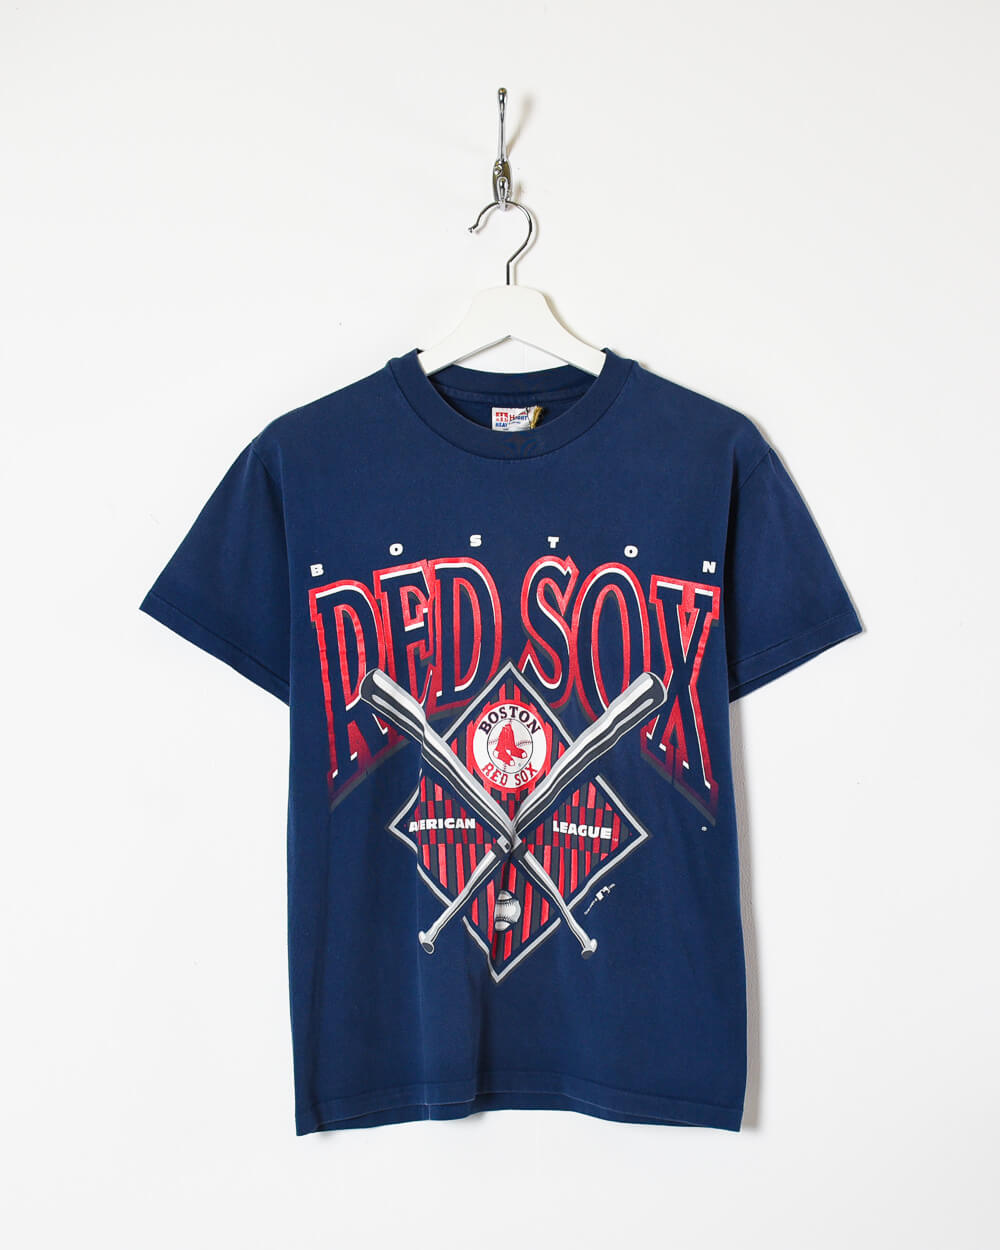 Vintage 90s Cotton Navy Hanes Heavy Weight Boston Red Sox T-Shirt